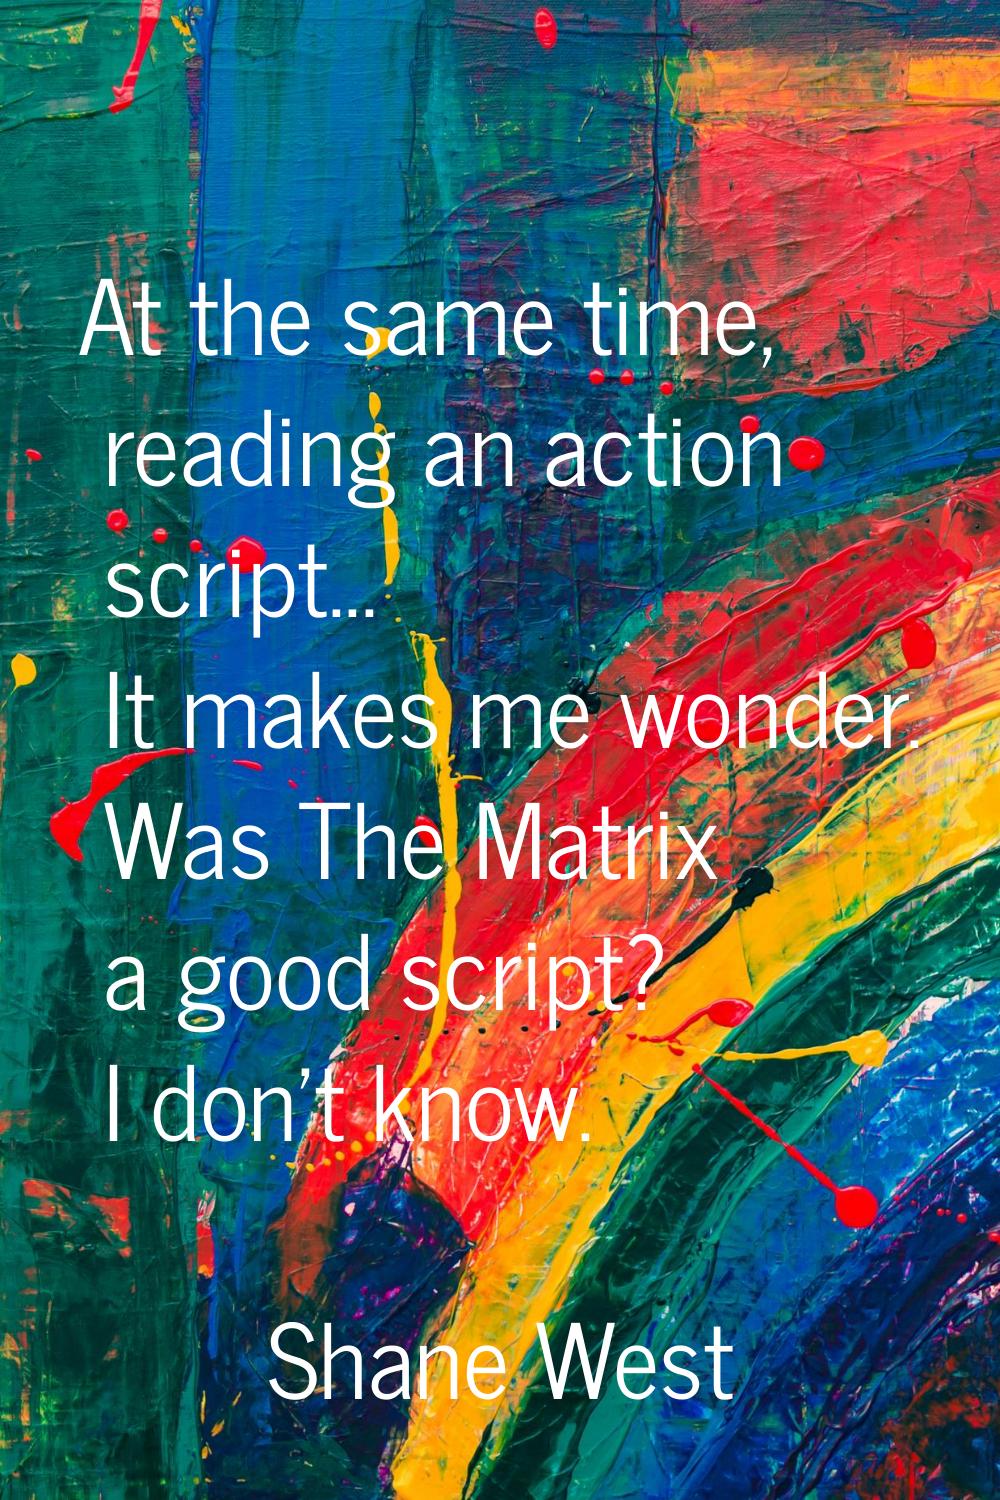 At the same time, reading an action script... It makes me wonder. Was The Matrix a good script? I d